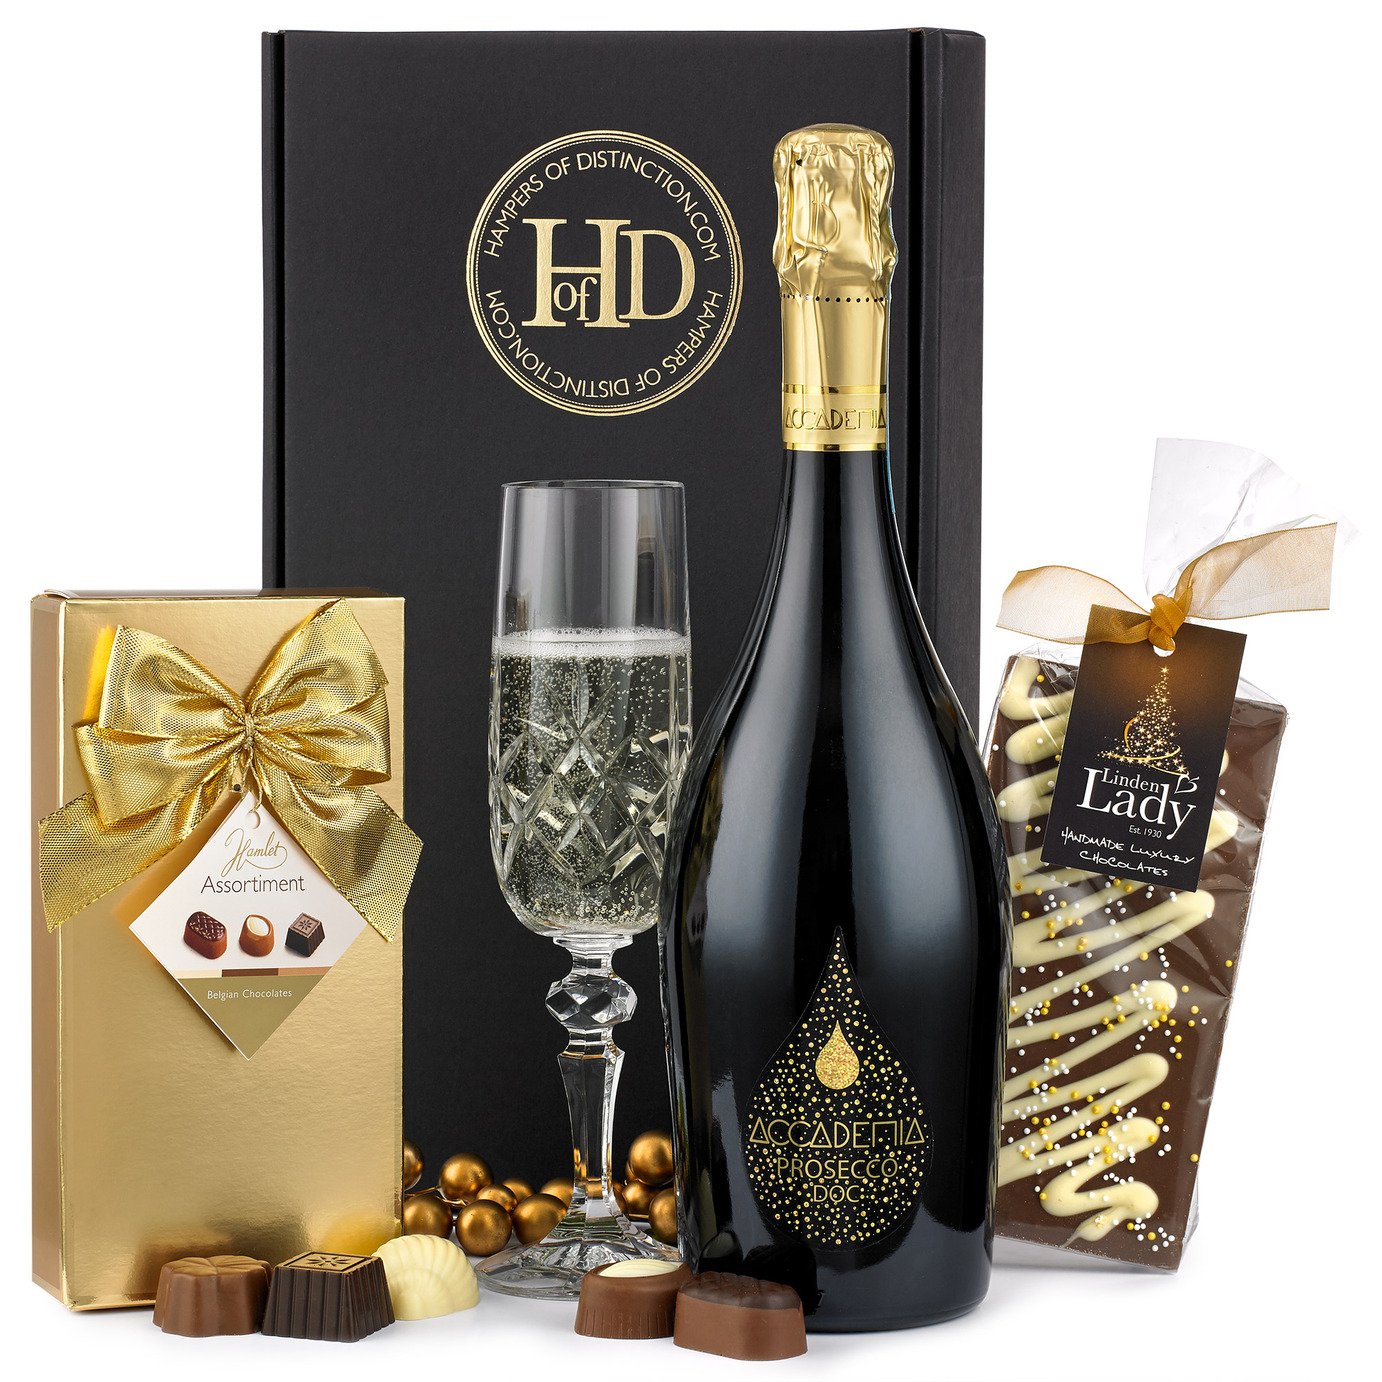 Hampers of Distinction Prosecco and Chocolates